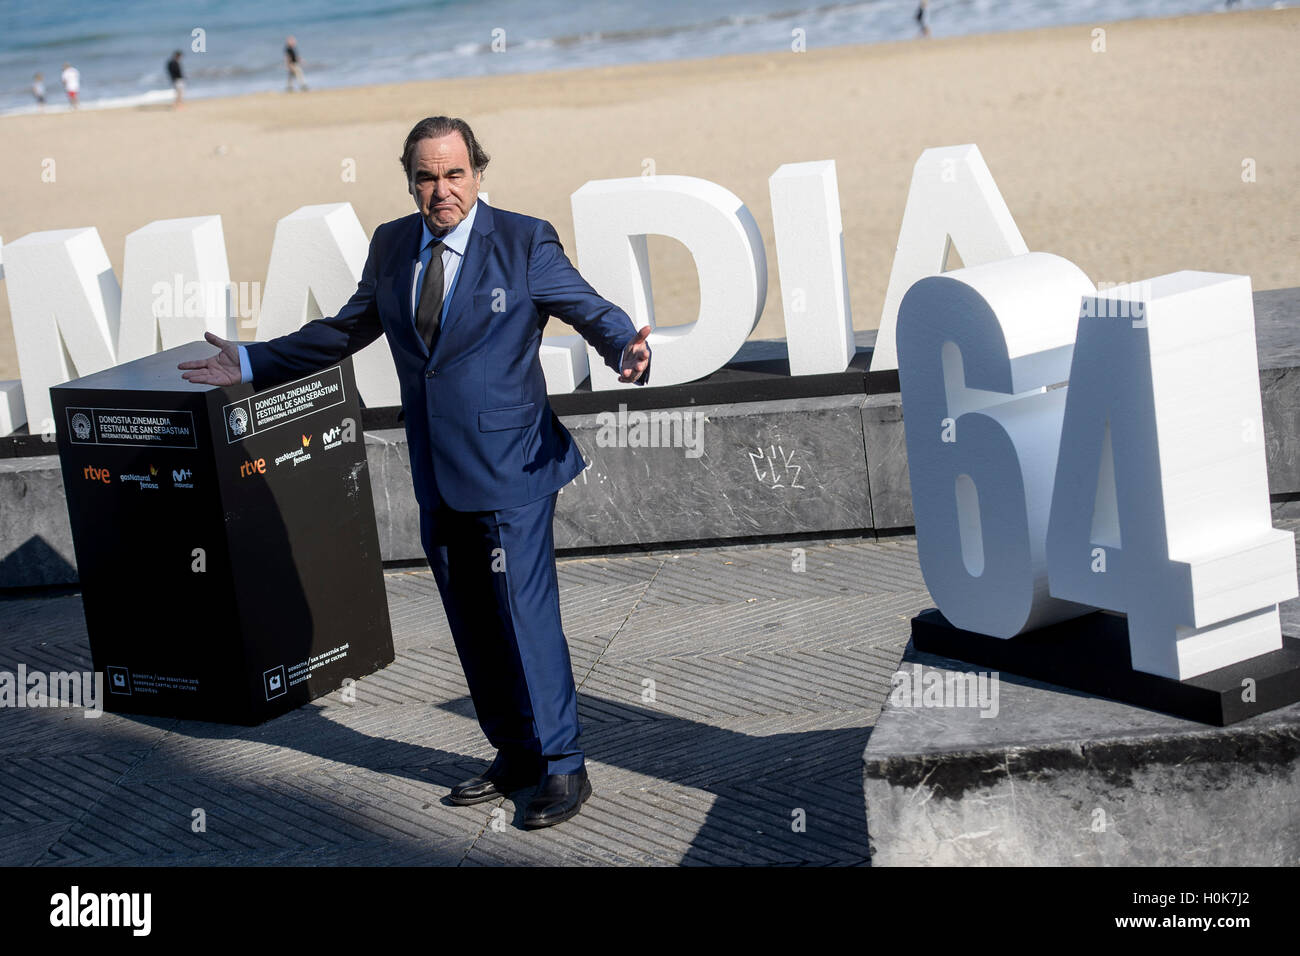 San Sebastian, Spain. 22nd September, 2016. Director Oliver Stone at photocall of "Snowden"during the 64th San Sebastian Film Festival in San Sebastian, Spain, on thursday 22th September, 2016. Credit:  Gtres Información más Comuniación on line,S.L./Alamy Live News Stock Photo